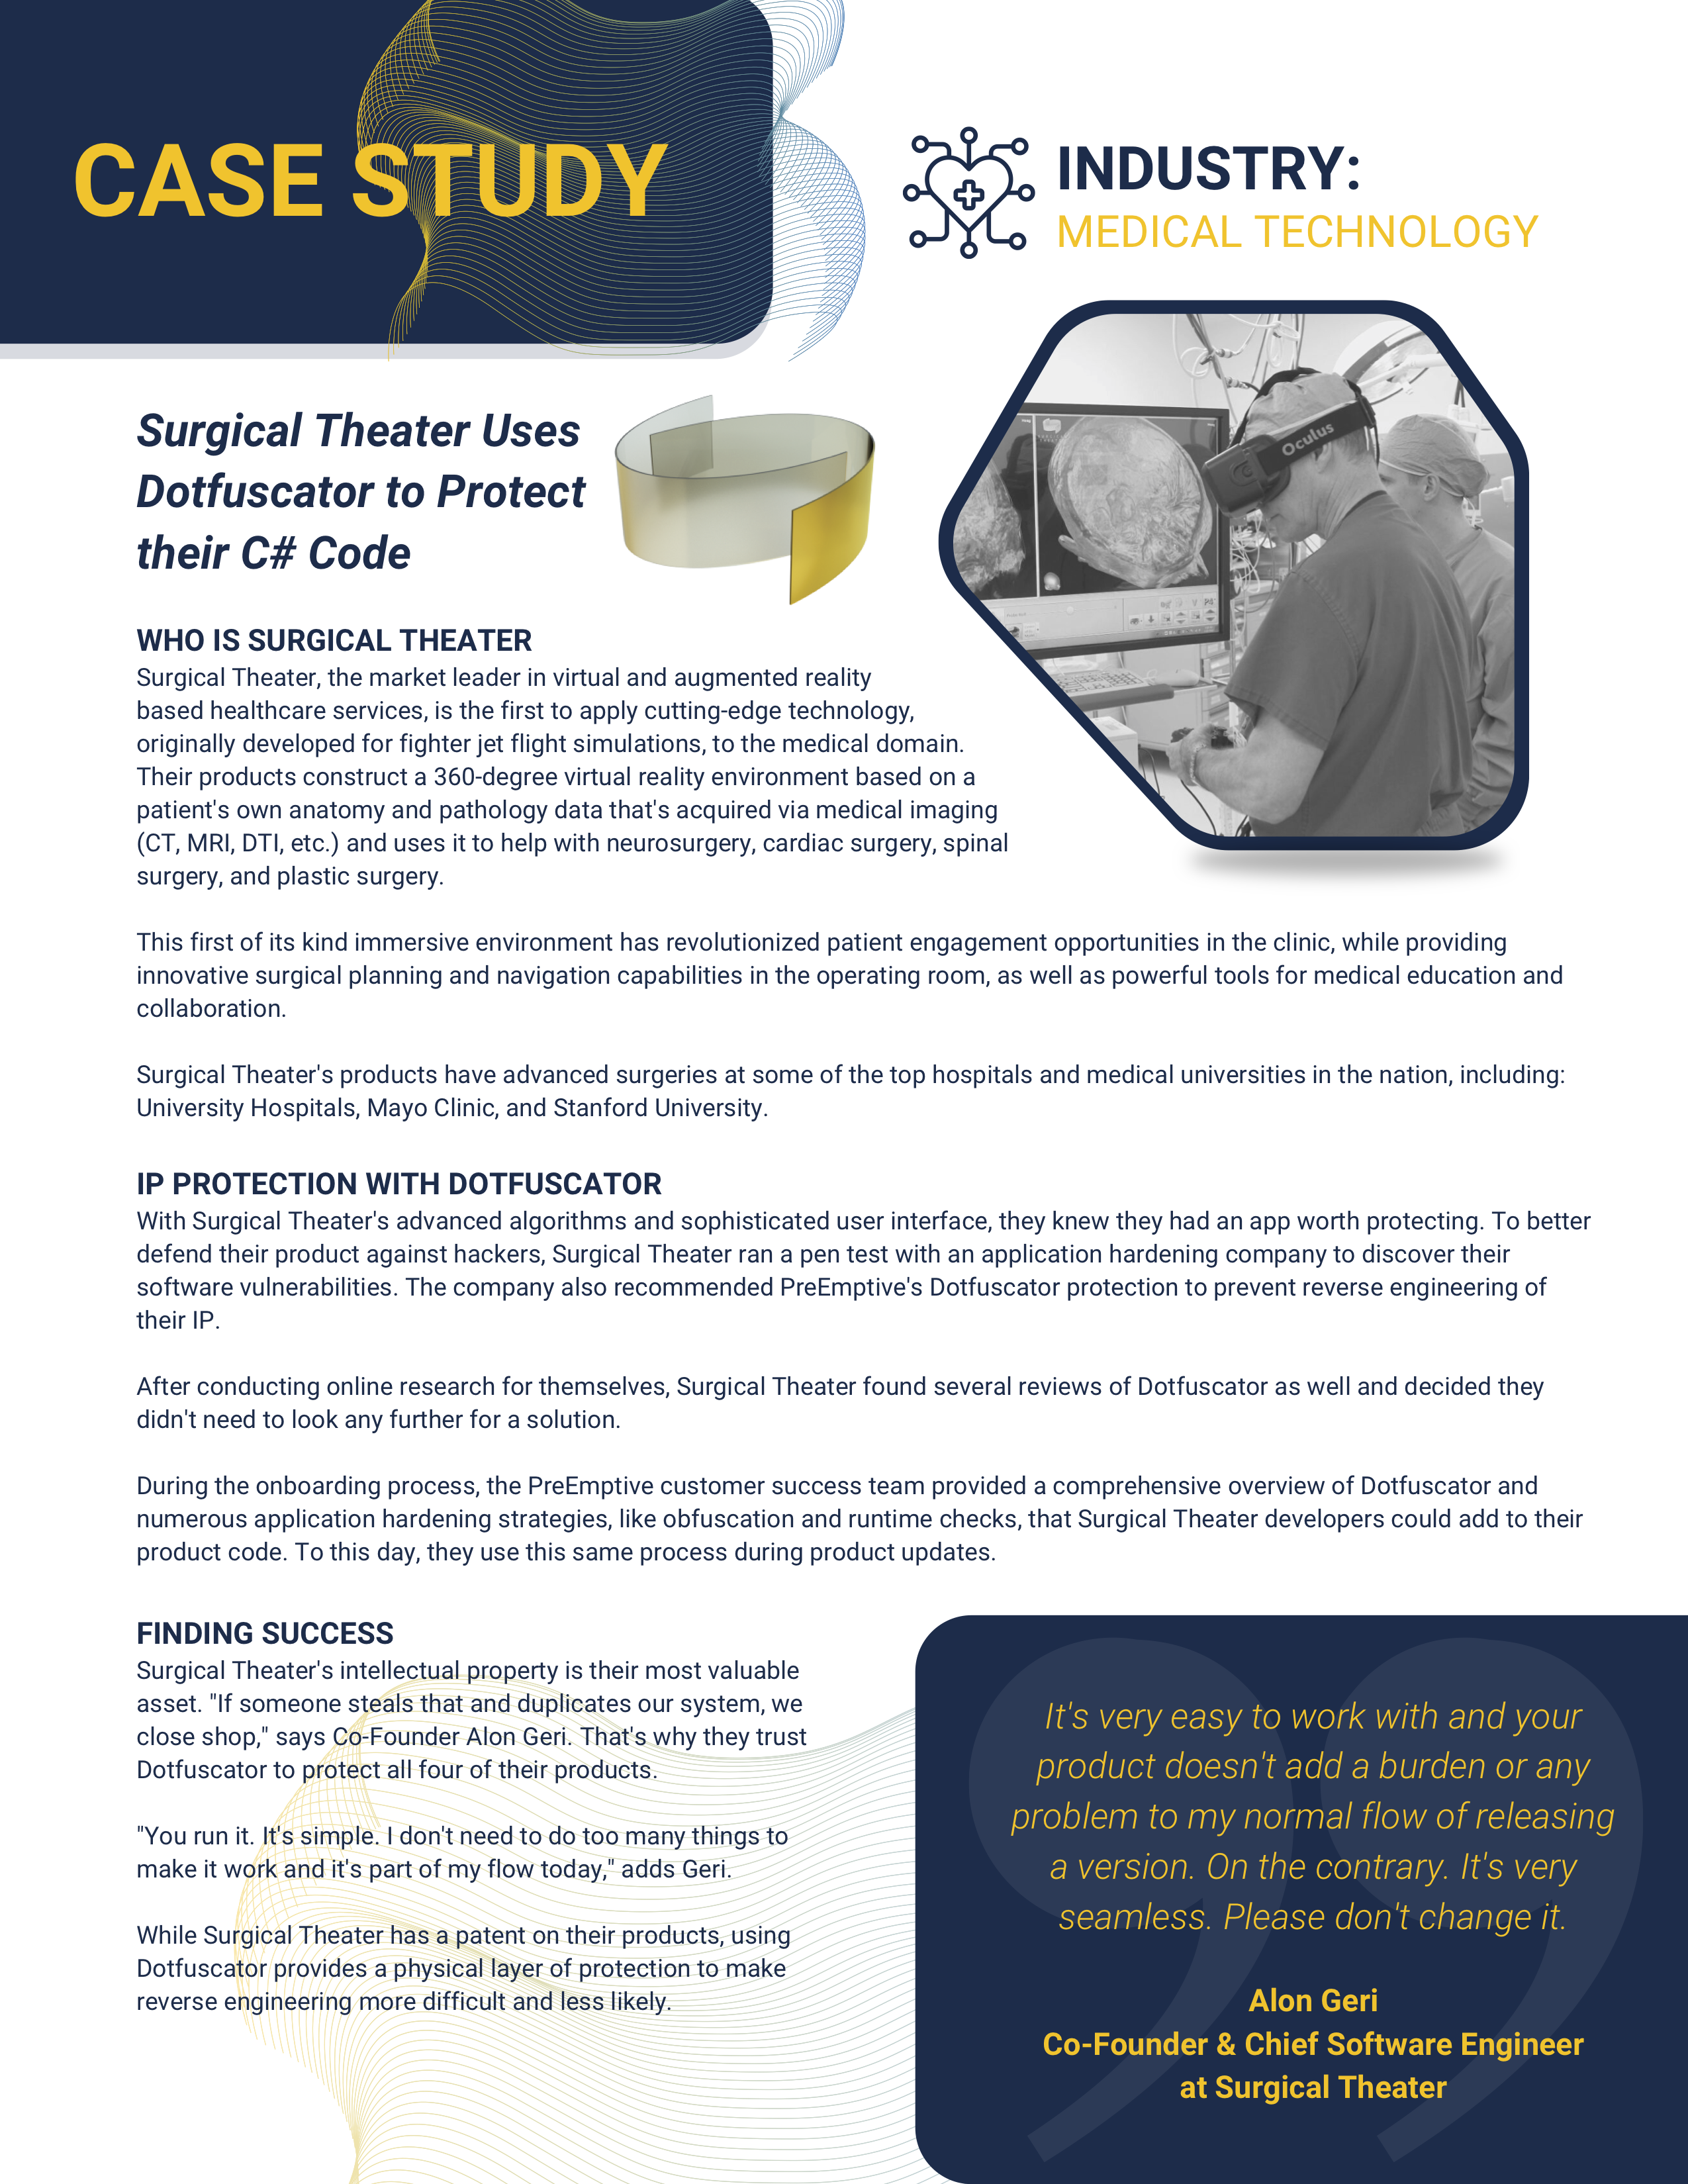 Surgical Theater Uses Dotfuscator to Protect their C# Code Case Study image download